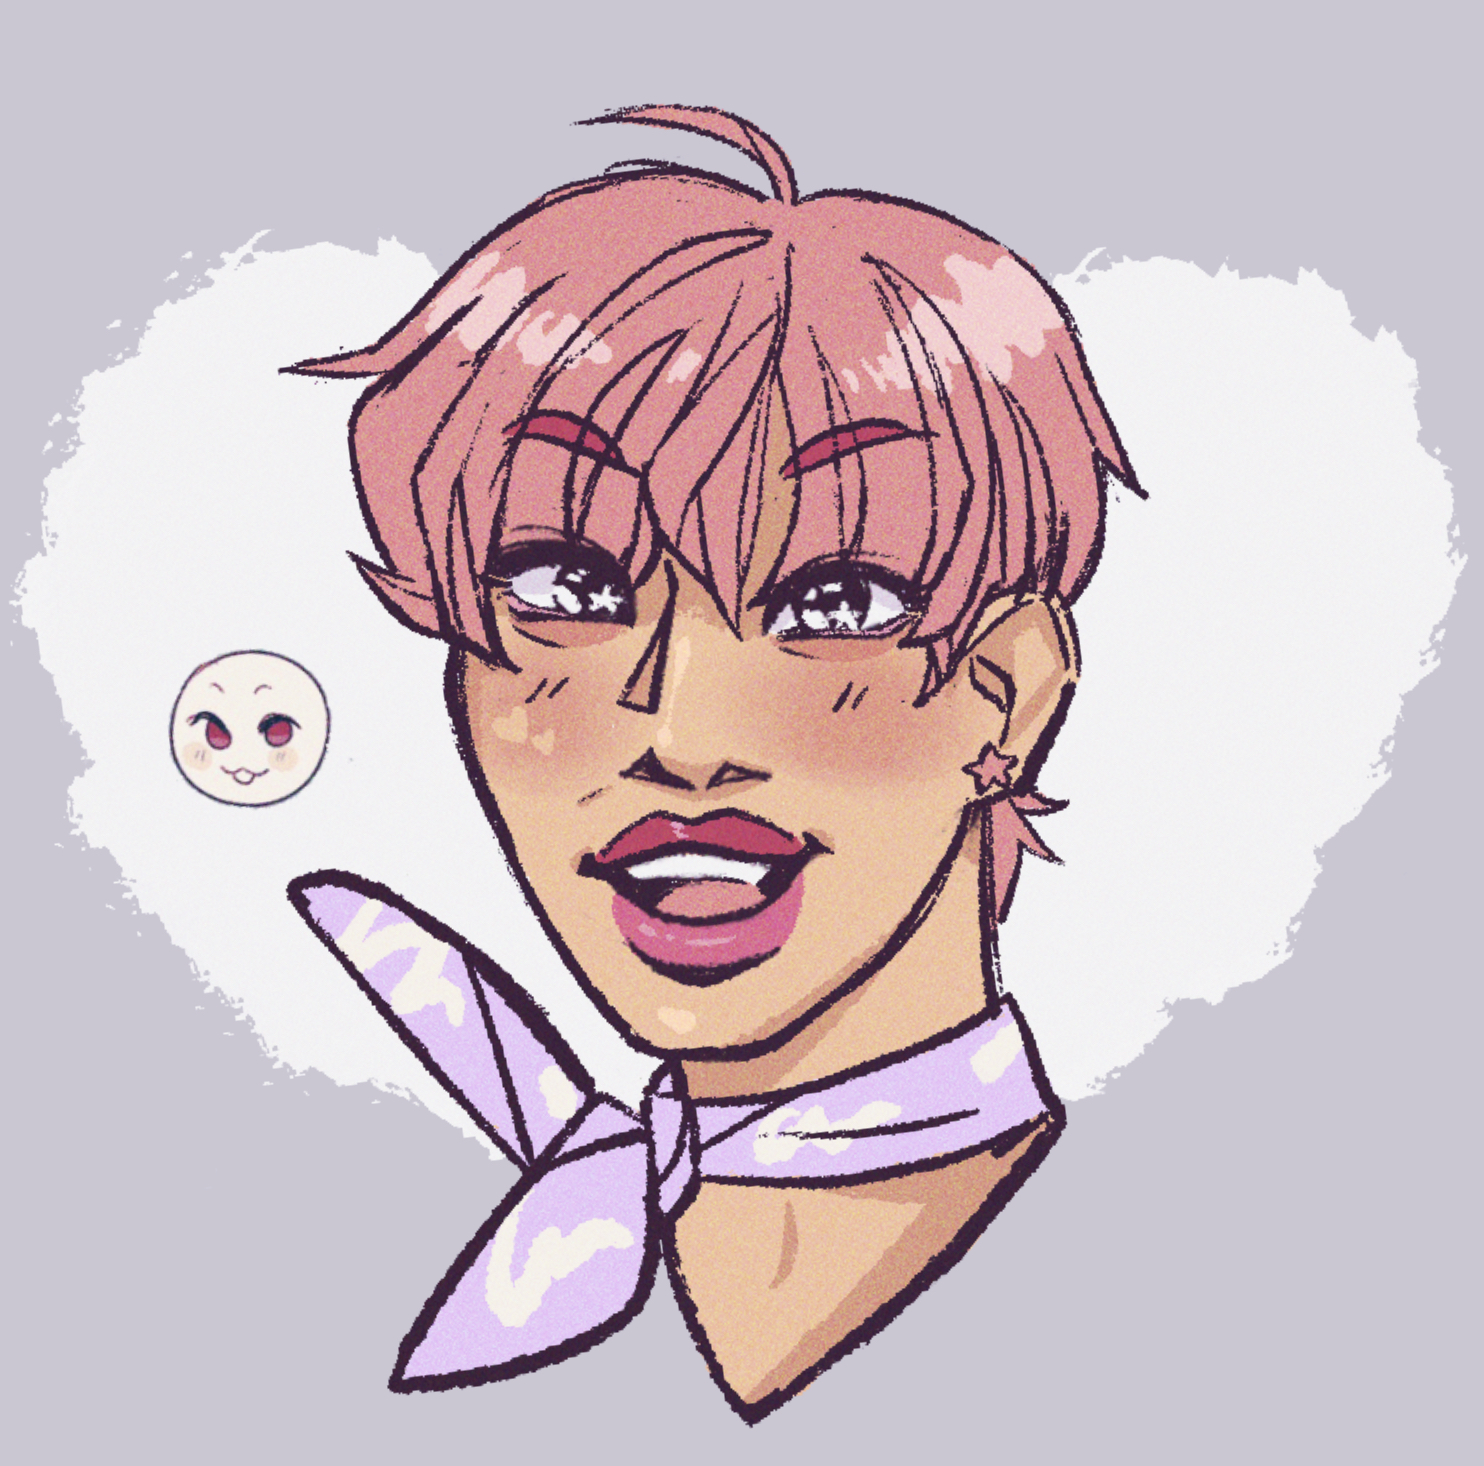 Art of Park Seonghwa from ATEEZ. A bust drawing of him smiling sweetly.